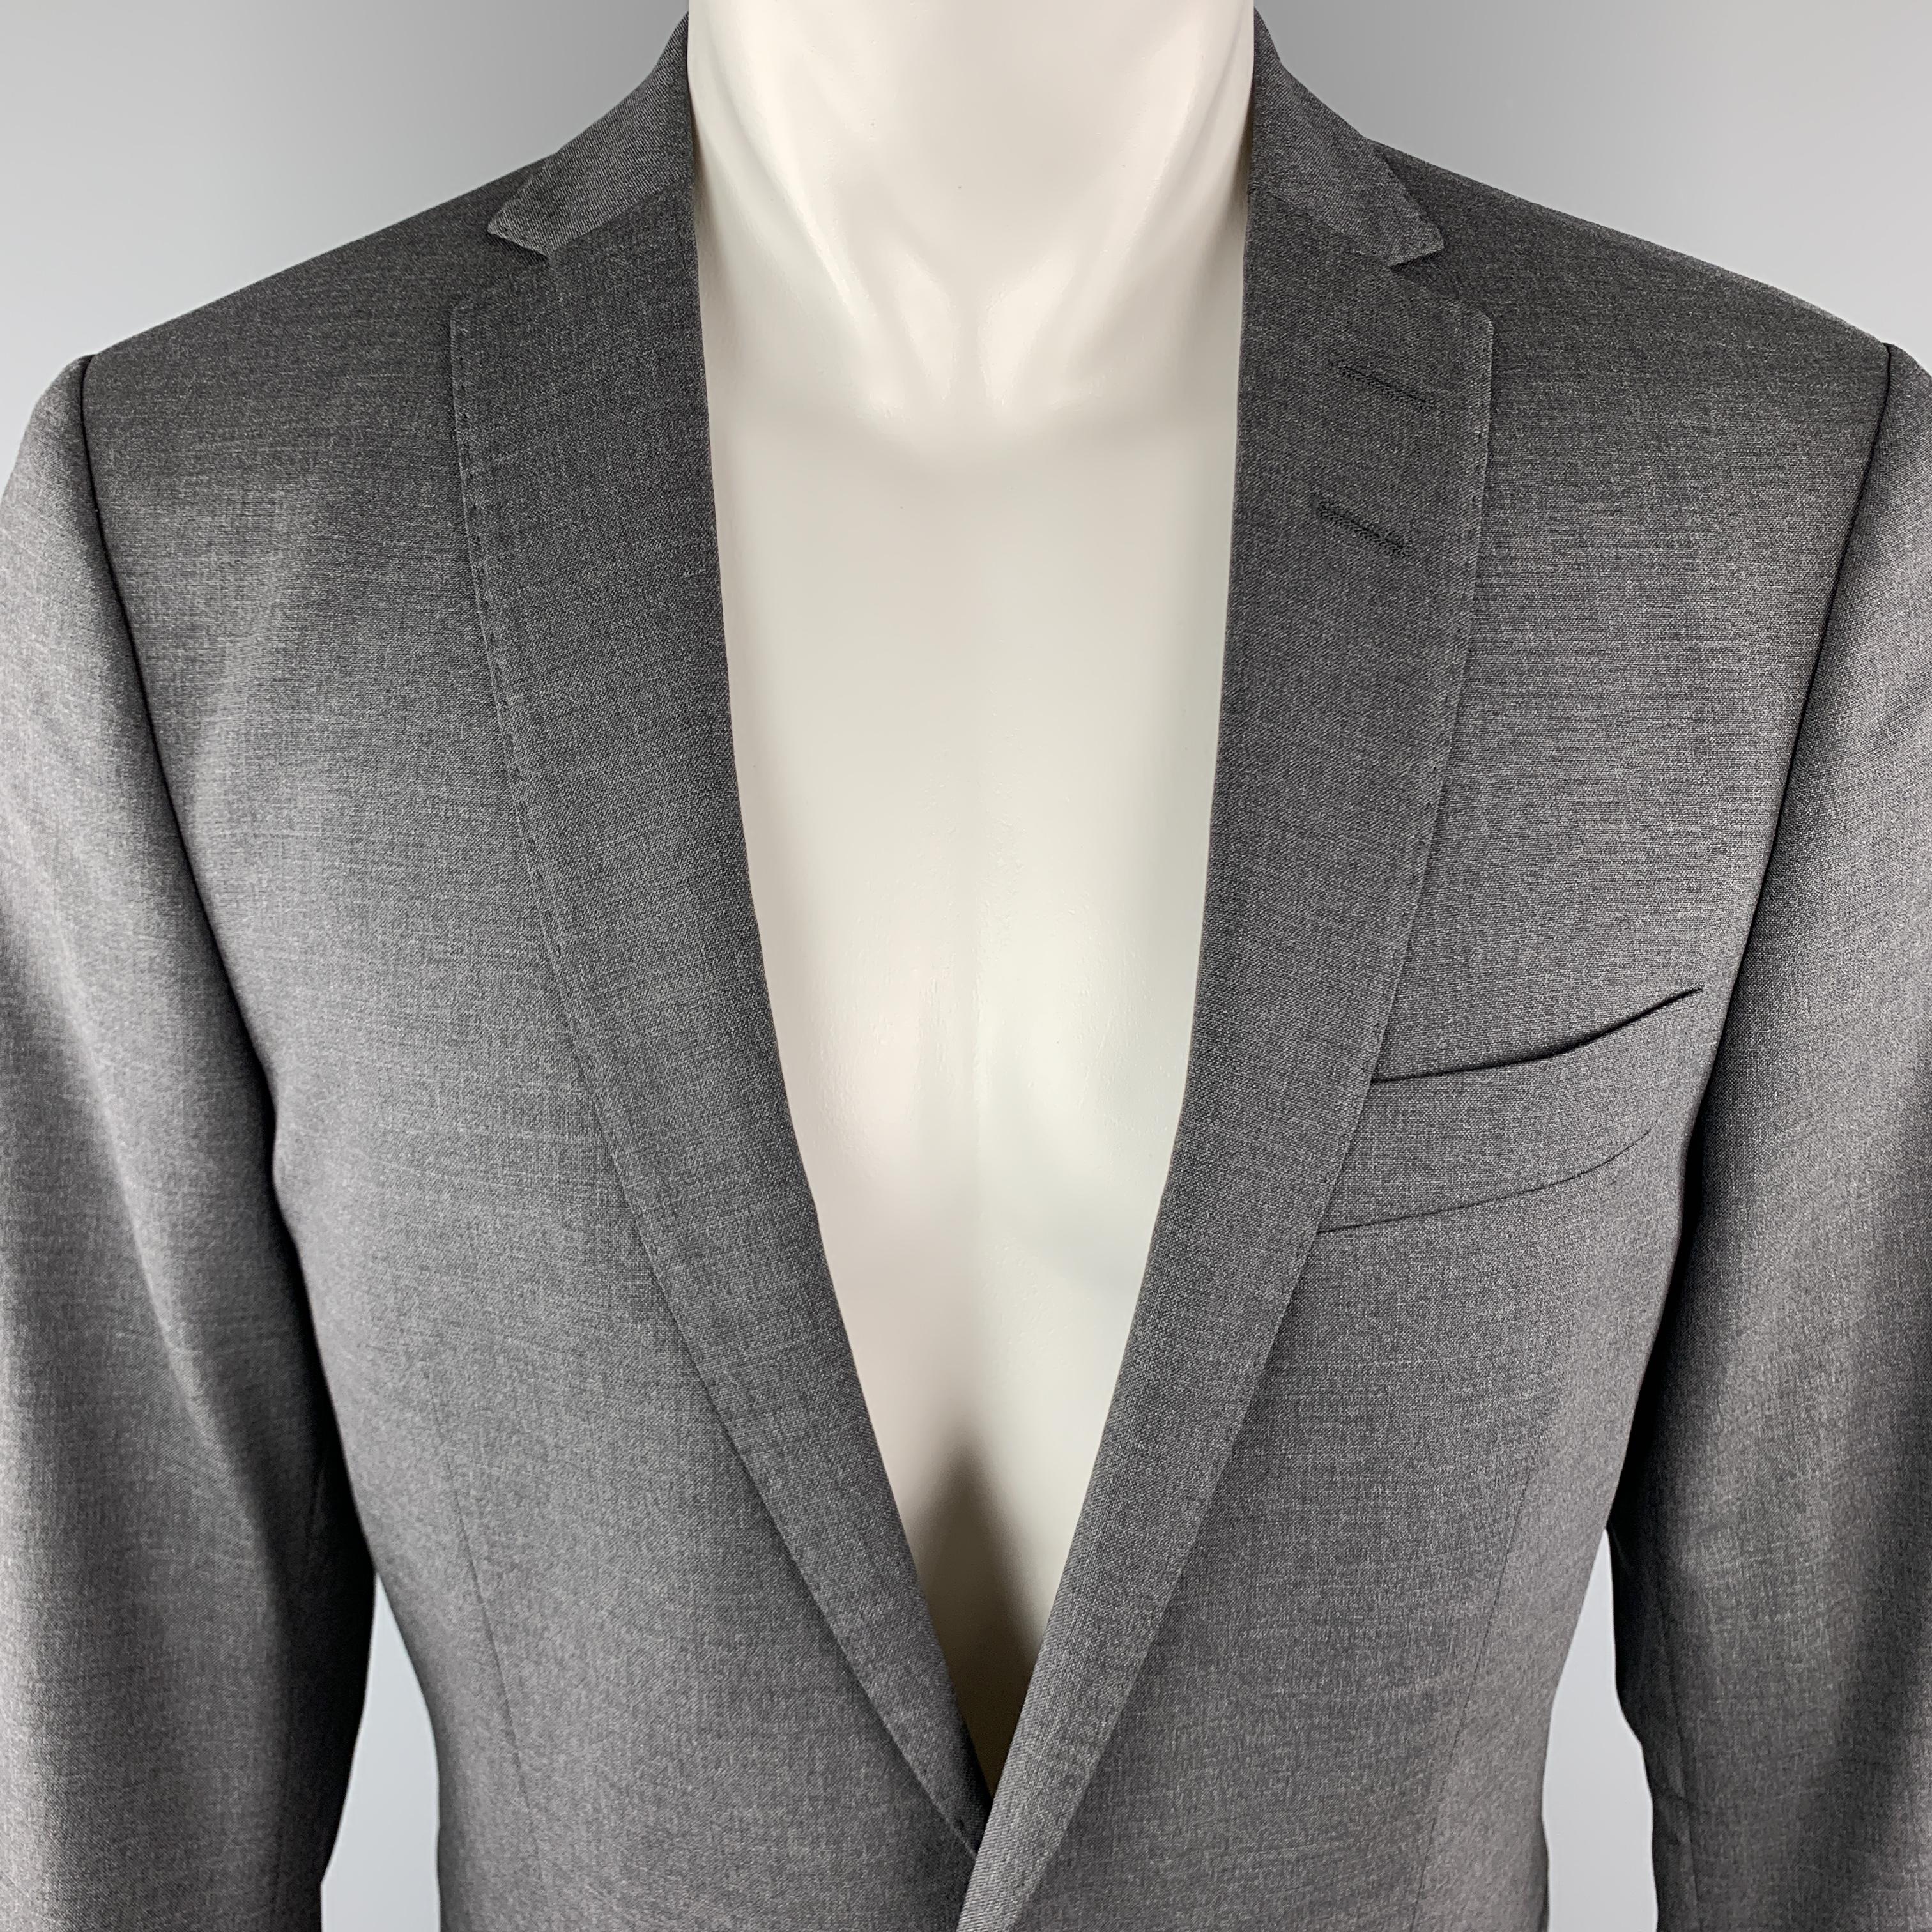 TIGER OF SWEDEN Sport Coat comes in a dark grey tone in a solid wool material, with a notch lapel, slit and flap pockets, two buttons at closure, buttoned cuffs, and a double vent at back. Made in Romania.

New With Tags.
Marked: IT